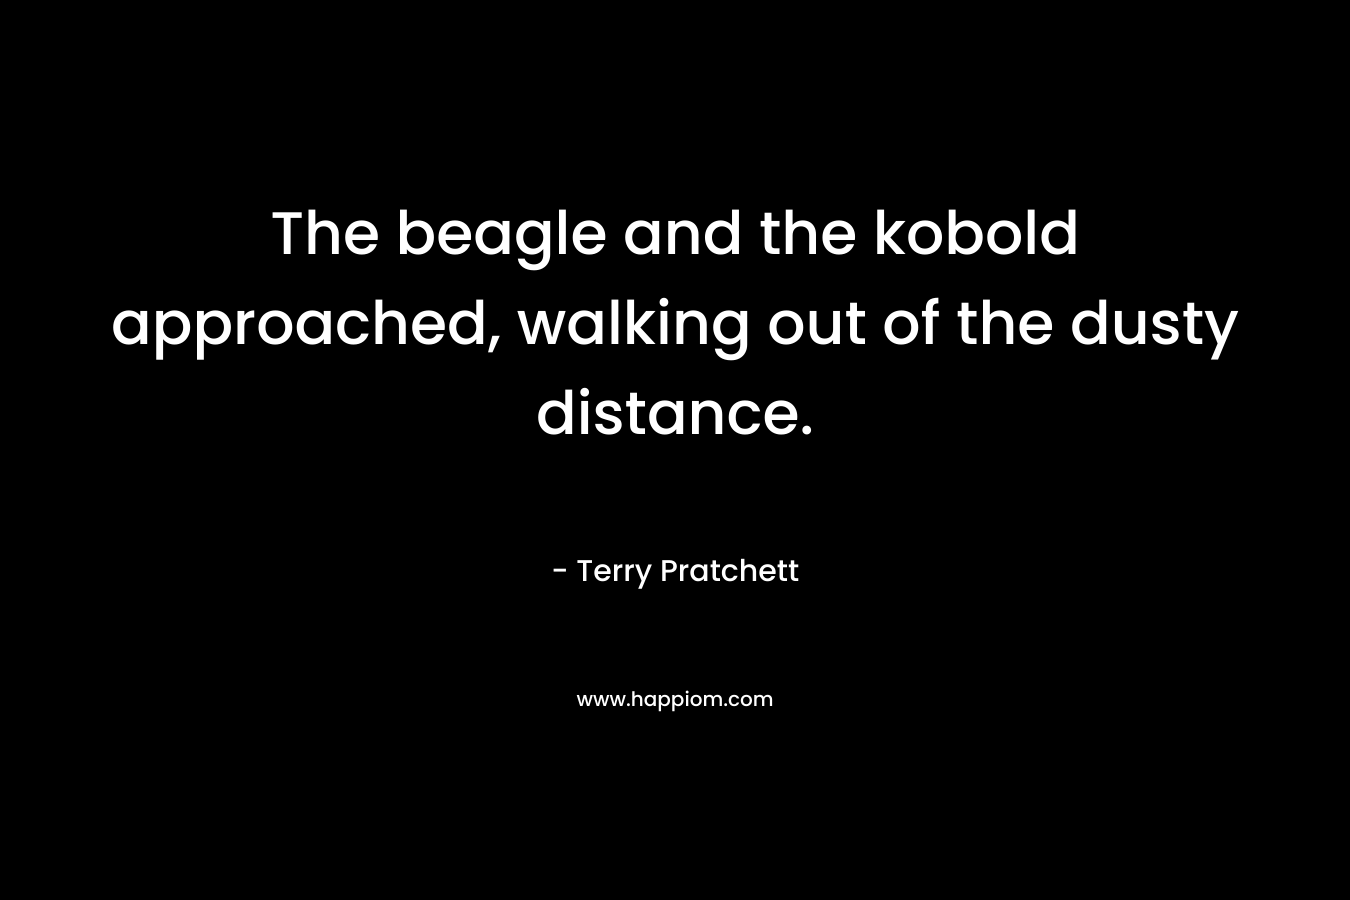 The beagle and the kobold approached, walking out of the dusty distance. – Terry Pratchett